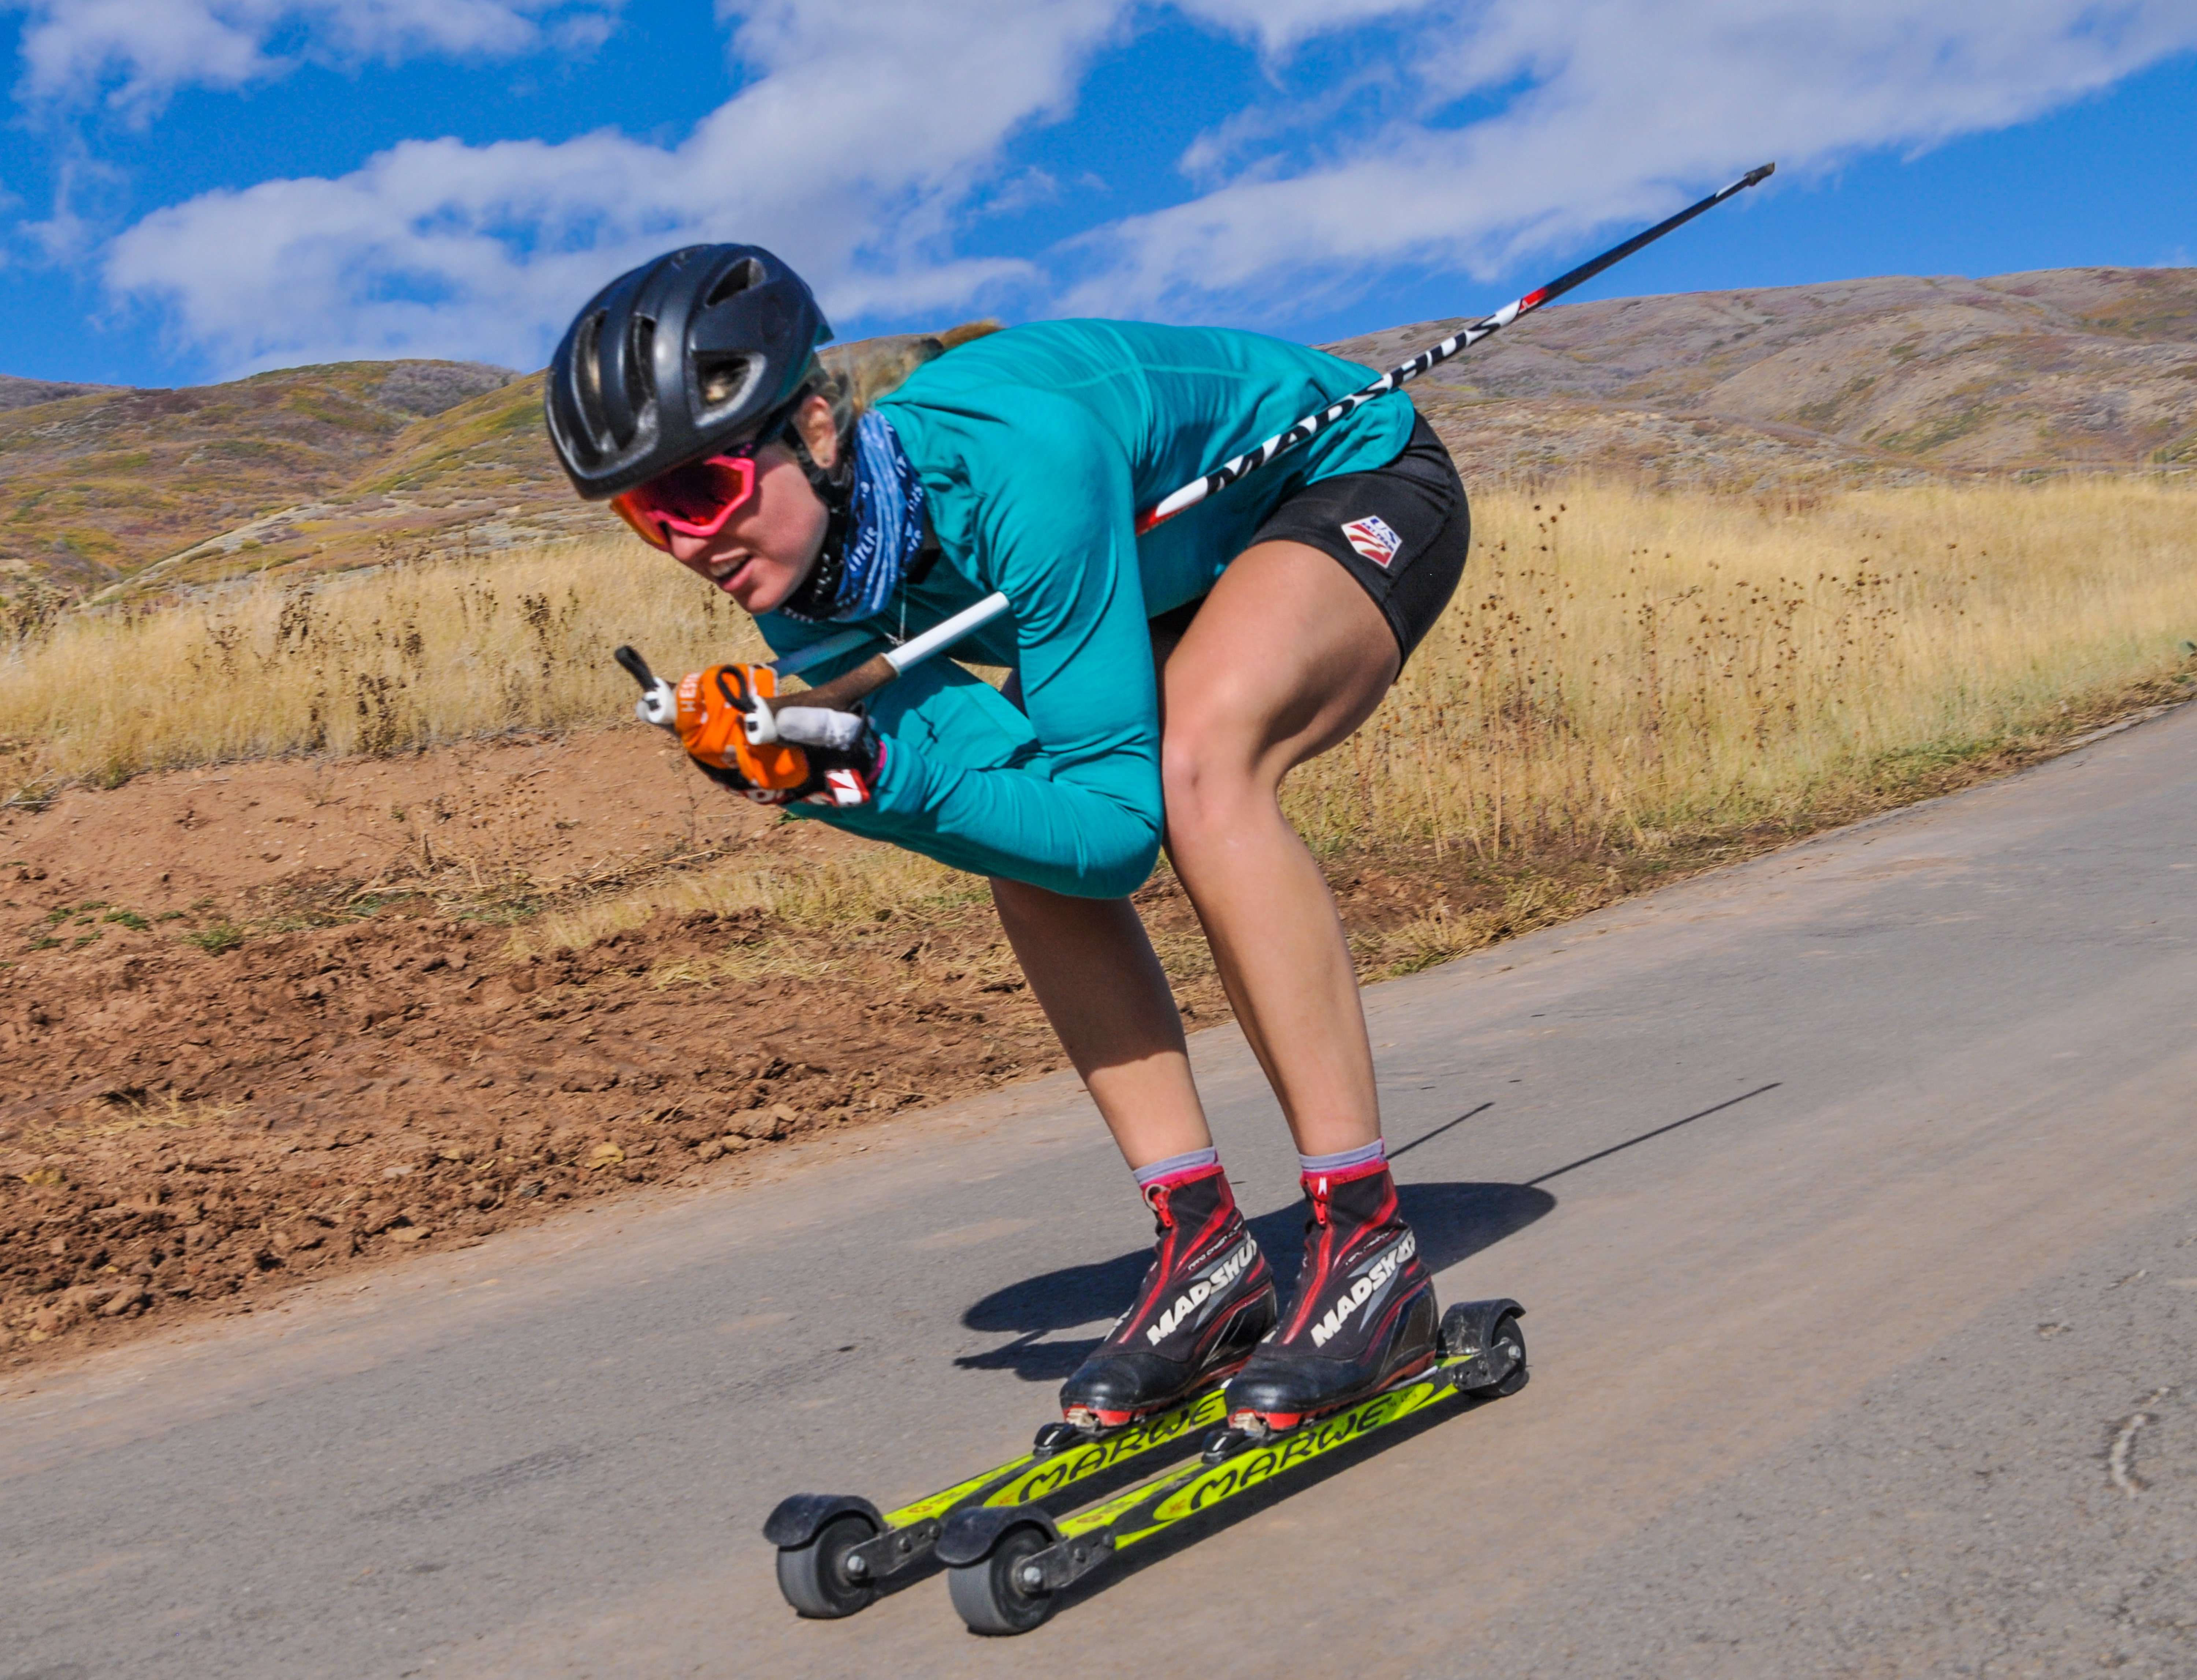 New Team, Same Hard Efforts: USST Park City Camp Part 2 from Hailey Swirbul